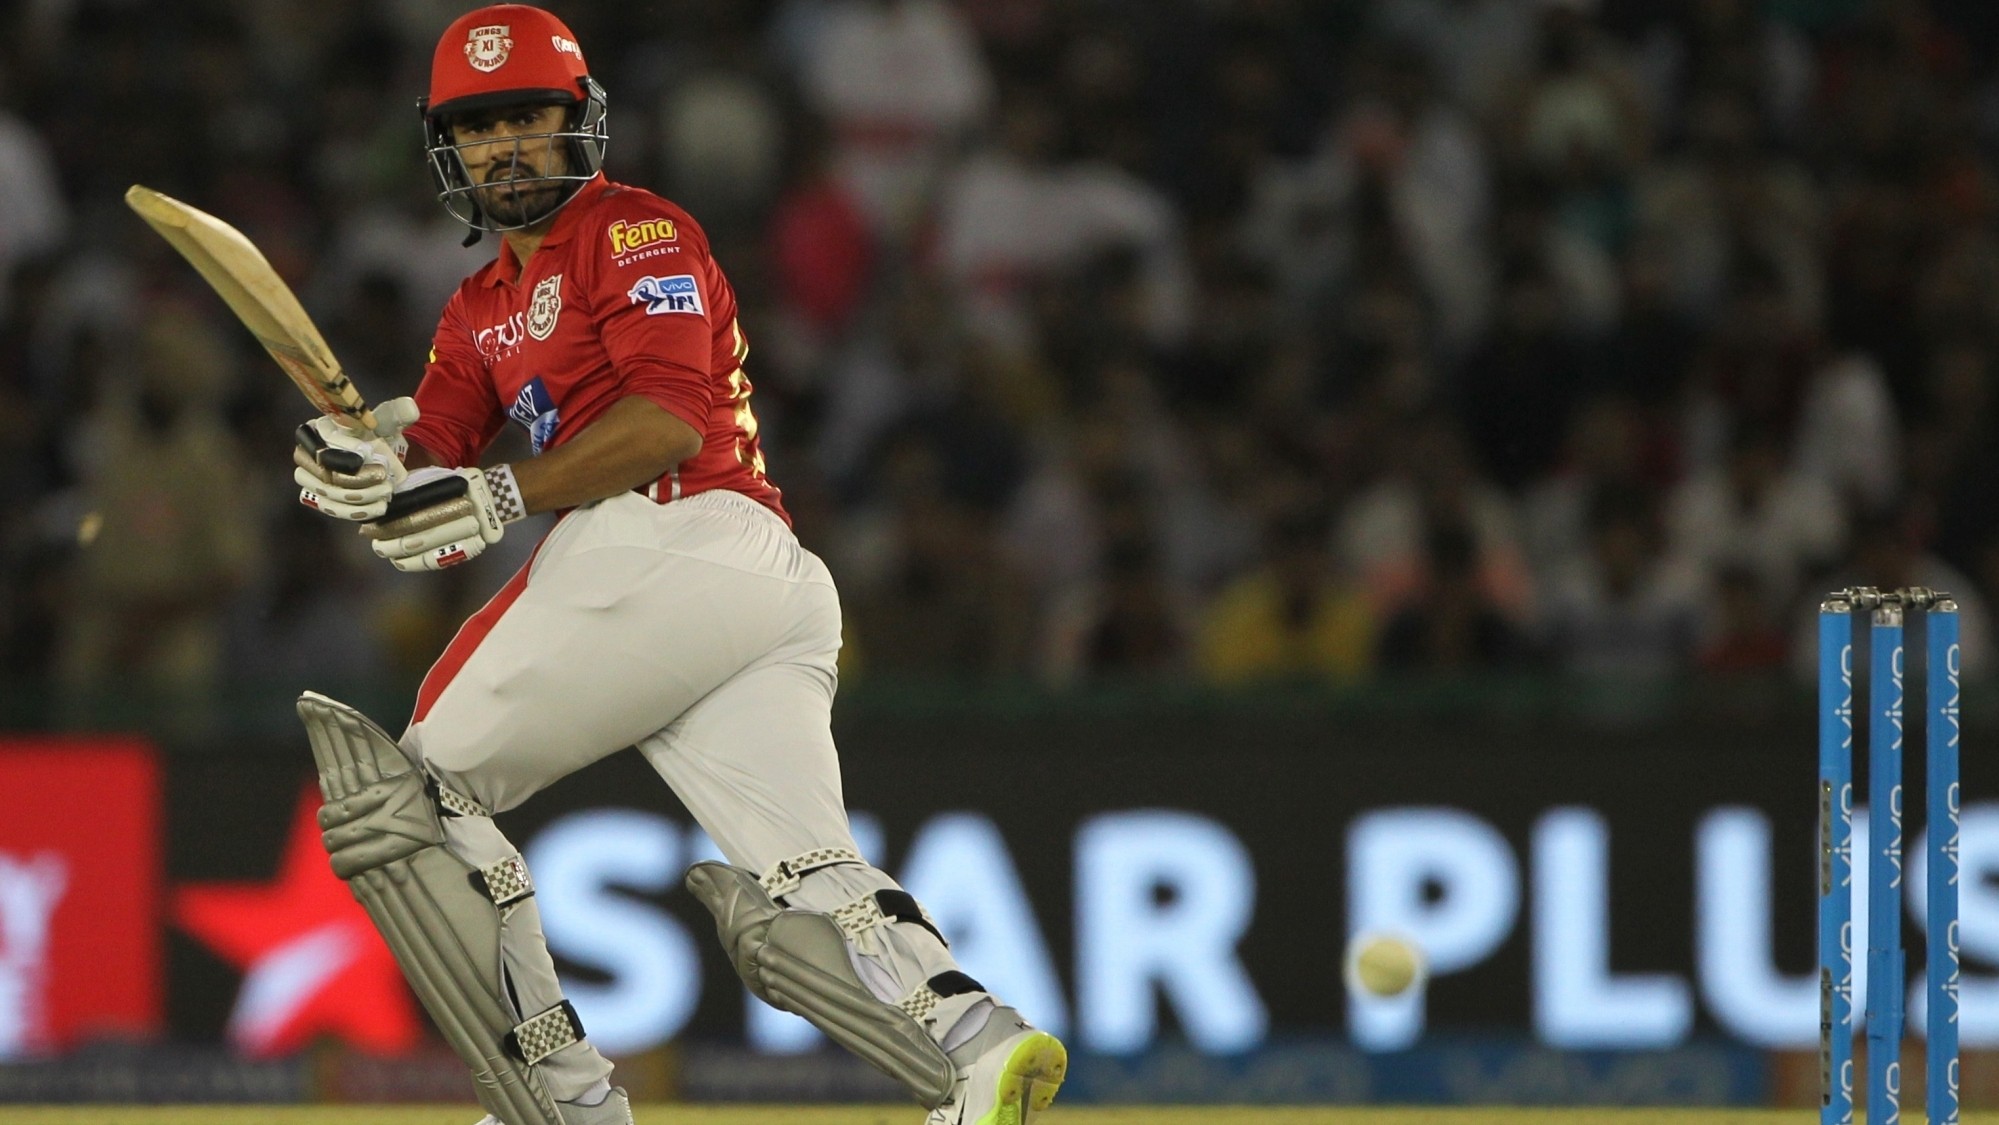 IPL 2020: KXIP CEO rubbishes reports of Karun Nair contracting COVID-19